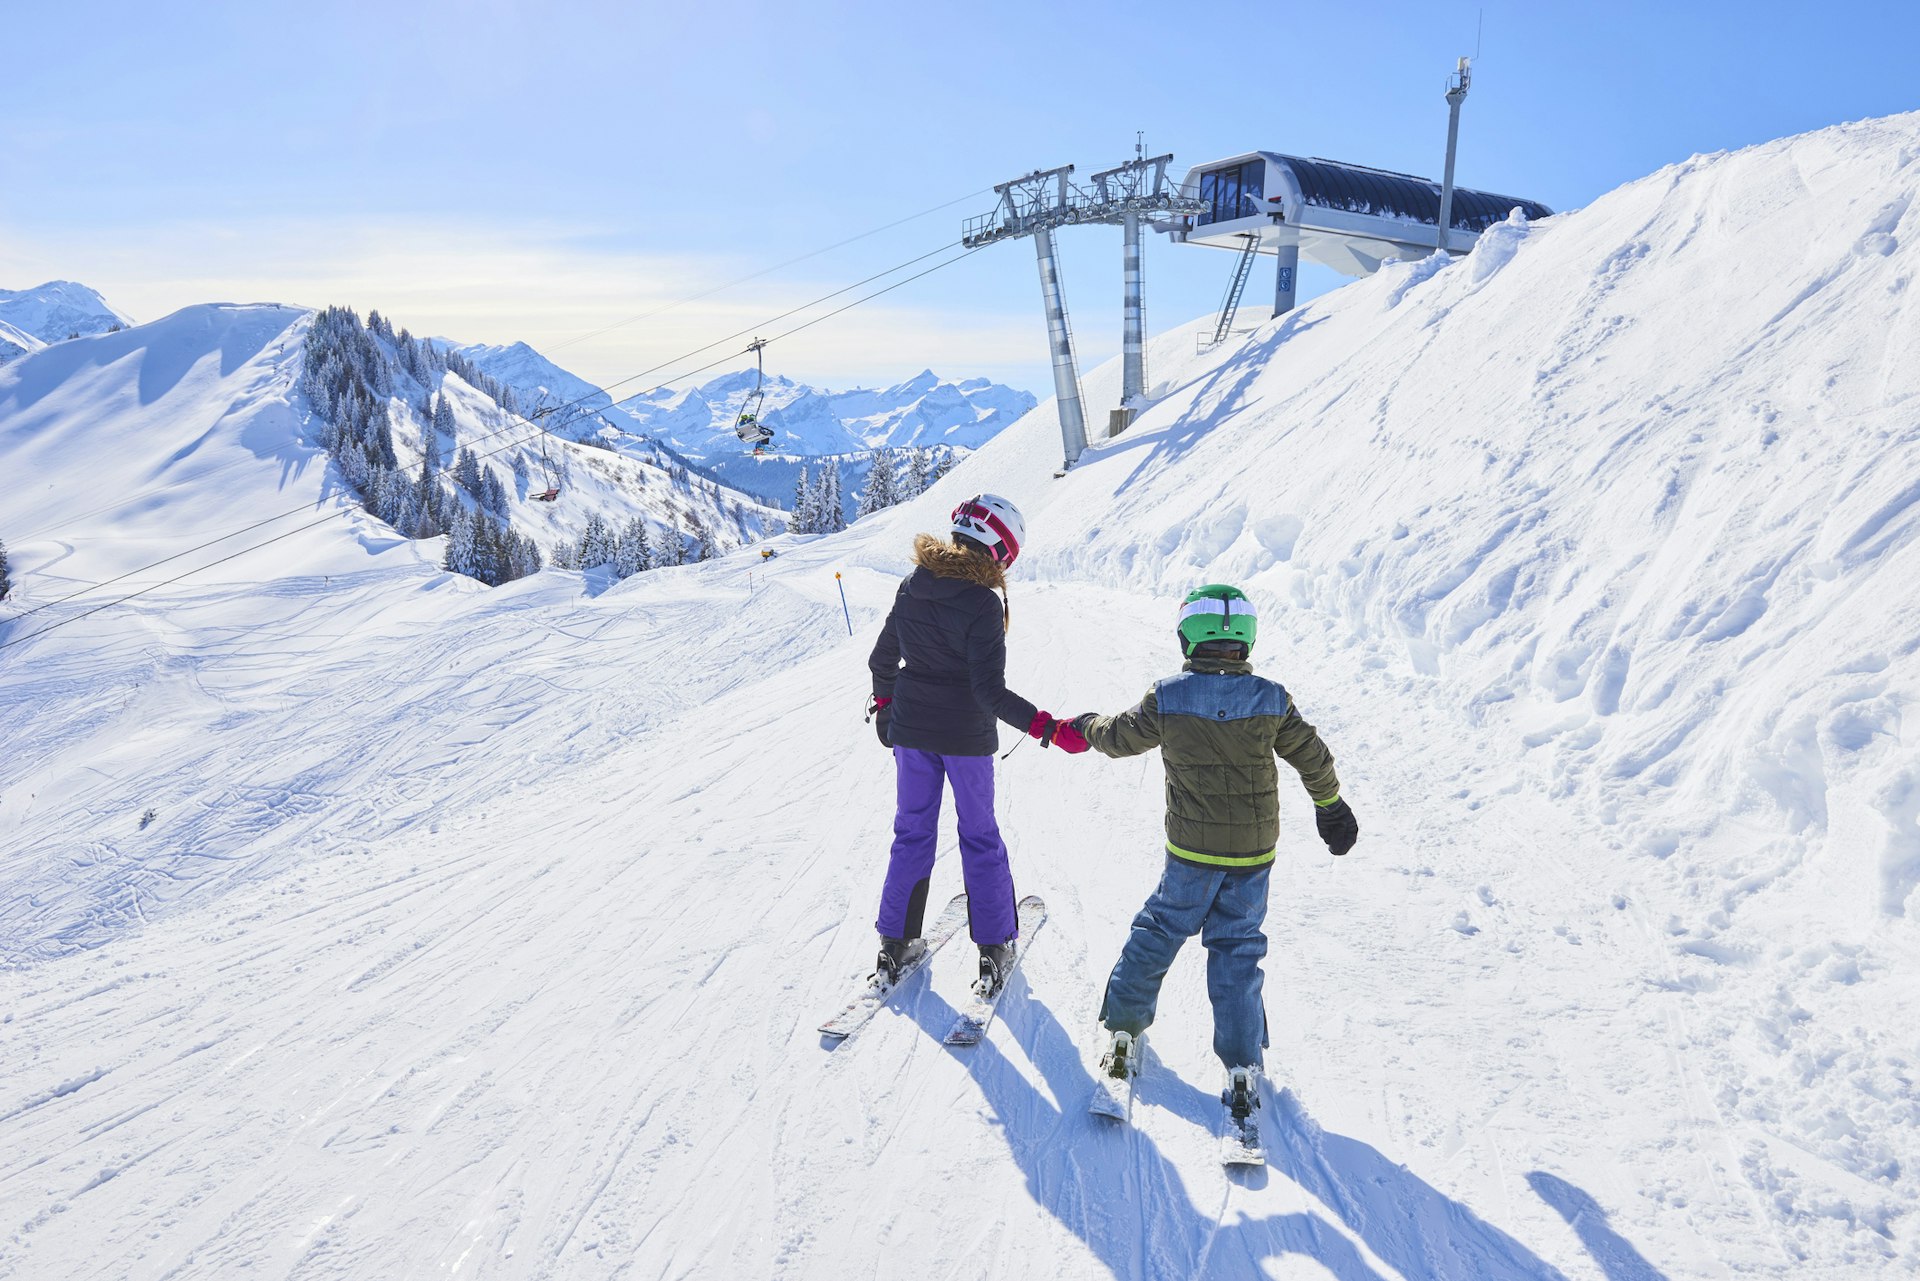 Two young children in full ski gear navigate their way towards a slope